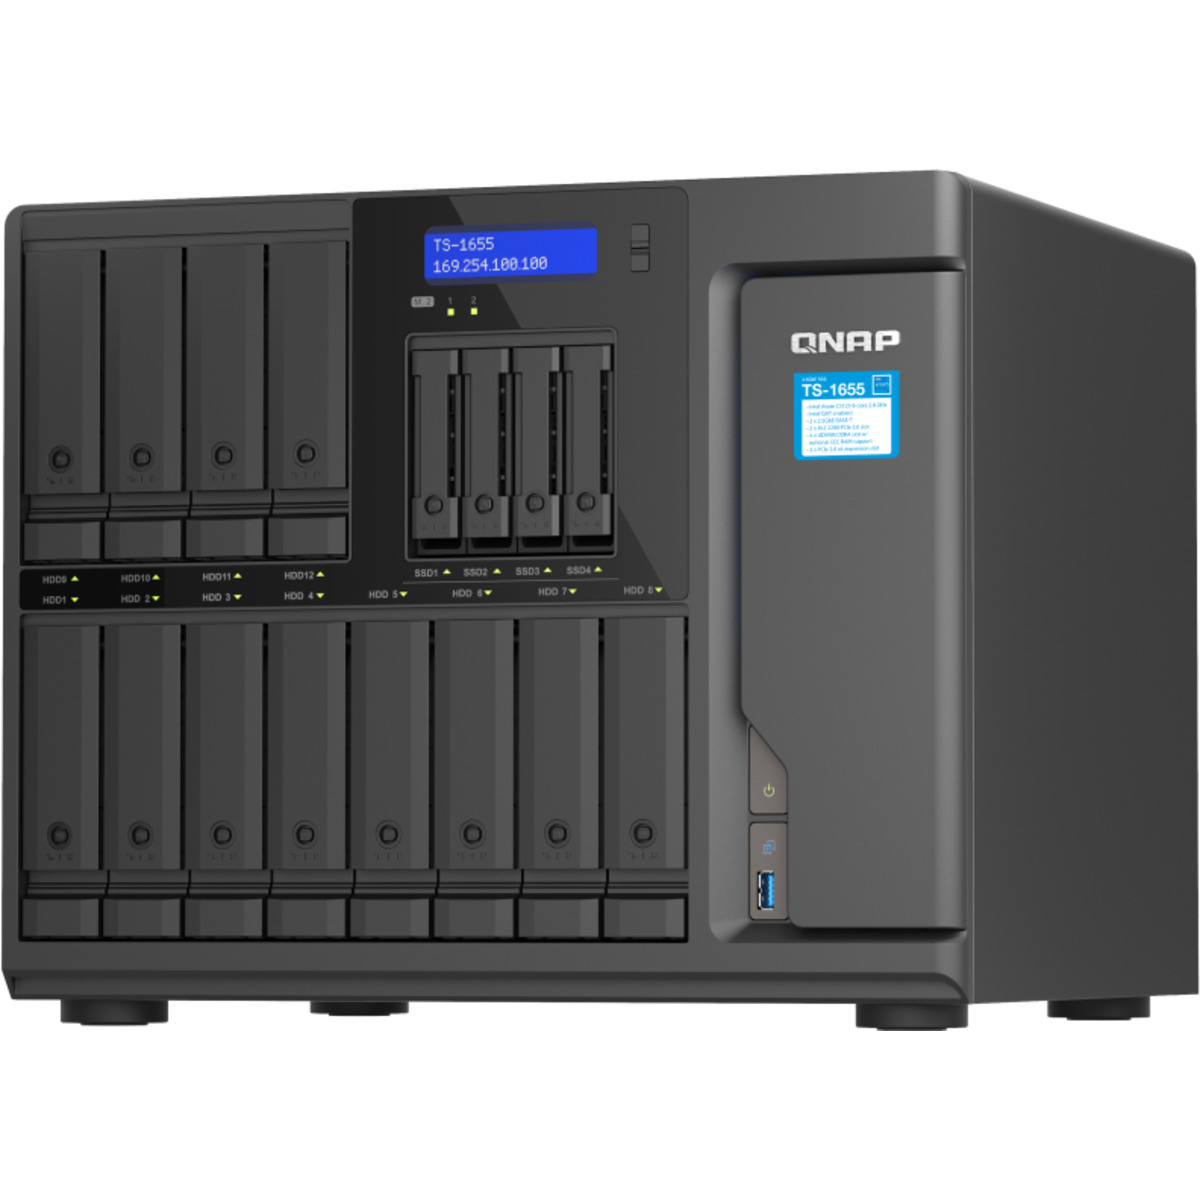 QNAP TS-1655 144tb 12+4-Bay Desktop Multimedia / Power User / Business NAS - Network Attached Storage Device 9x16tb Western Digital Ultrastar DC HC550 WUH721816ALE6L4 3.5 7200rpm SATA 6Gb/s HDD ENTERPRISE Class Drives Installed - Burn-In Tested - FREE RAM UPGRADE TS-1655